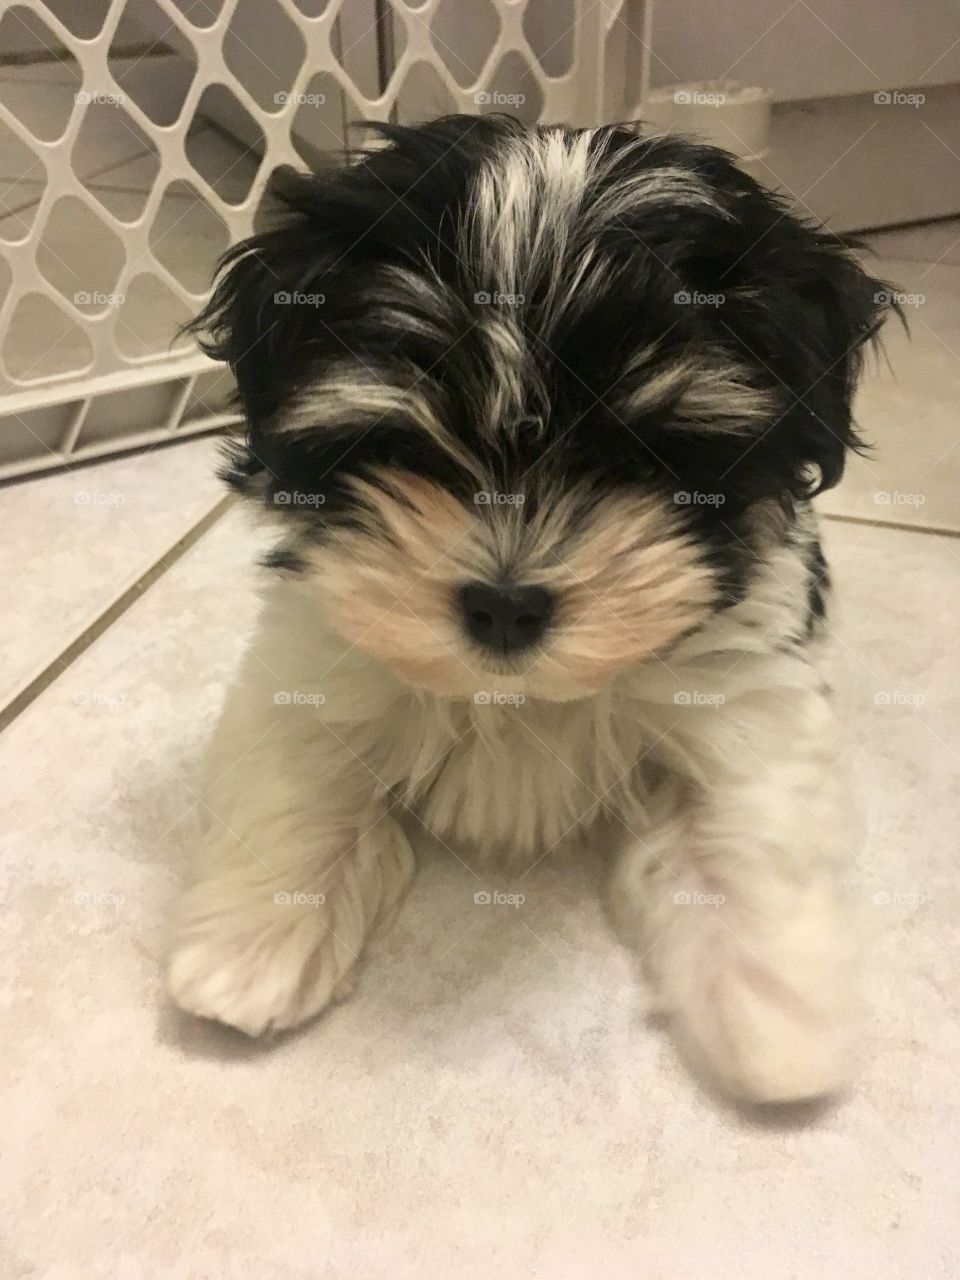 A cute, furry, tiny, black and white puppy 